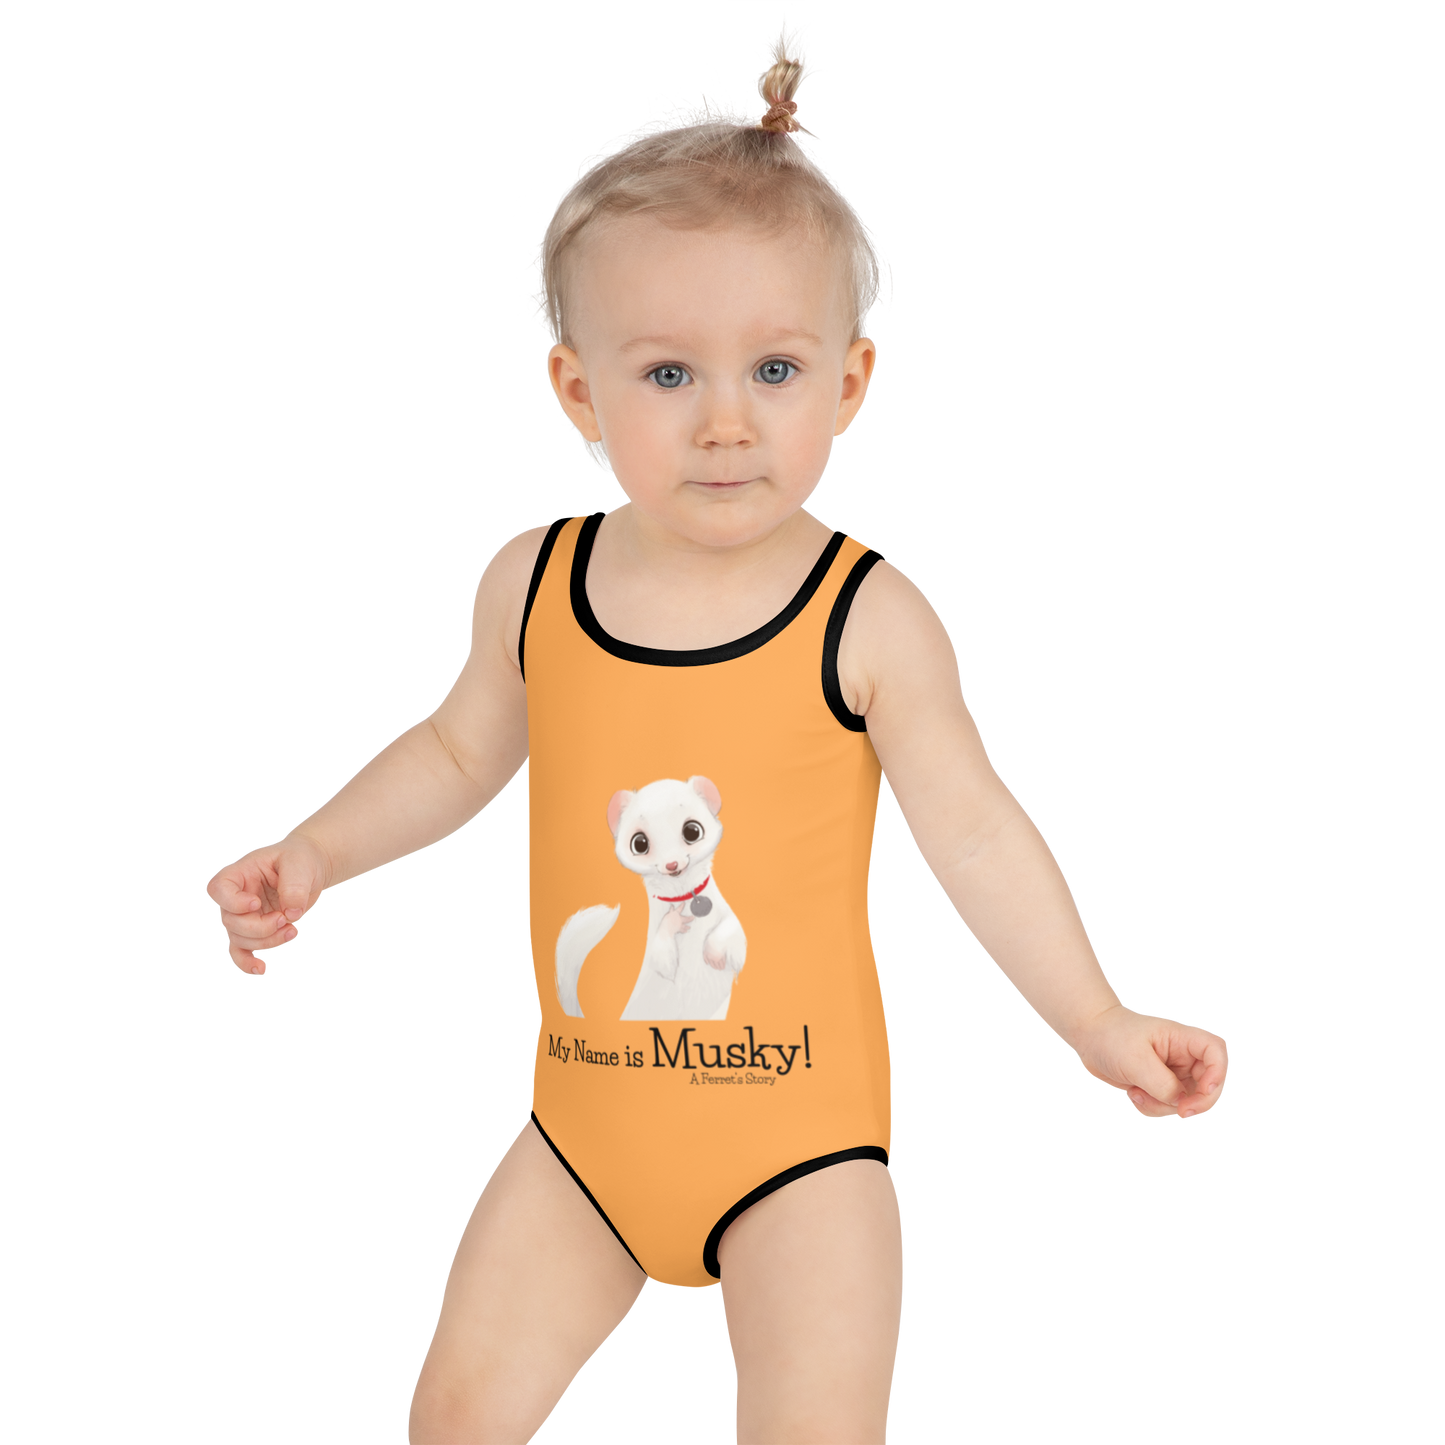 "My Name is Musky! A Ferret's Story" Outrageous Orange Kids Swimsuit!